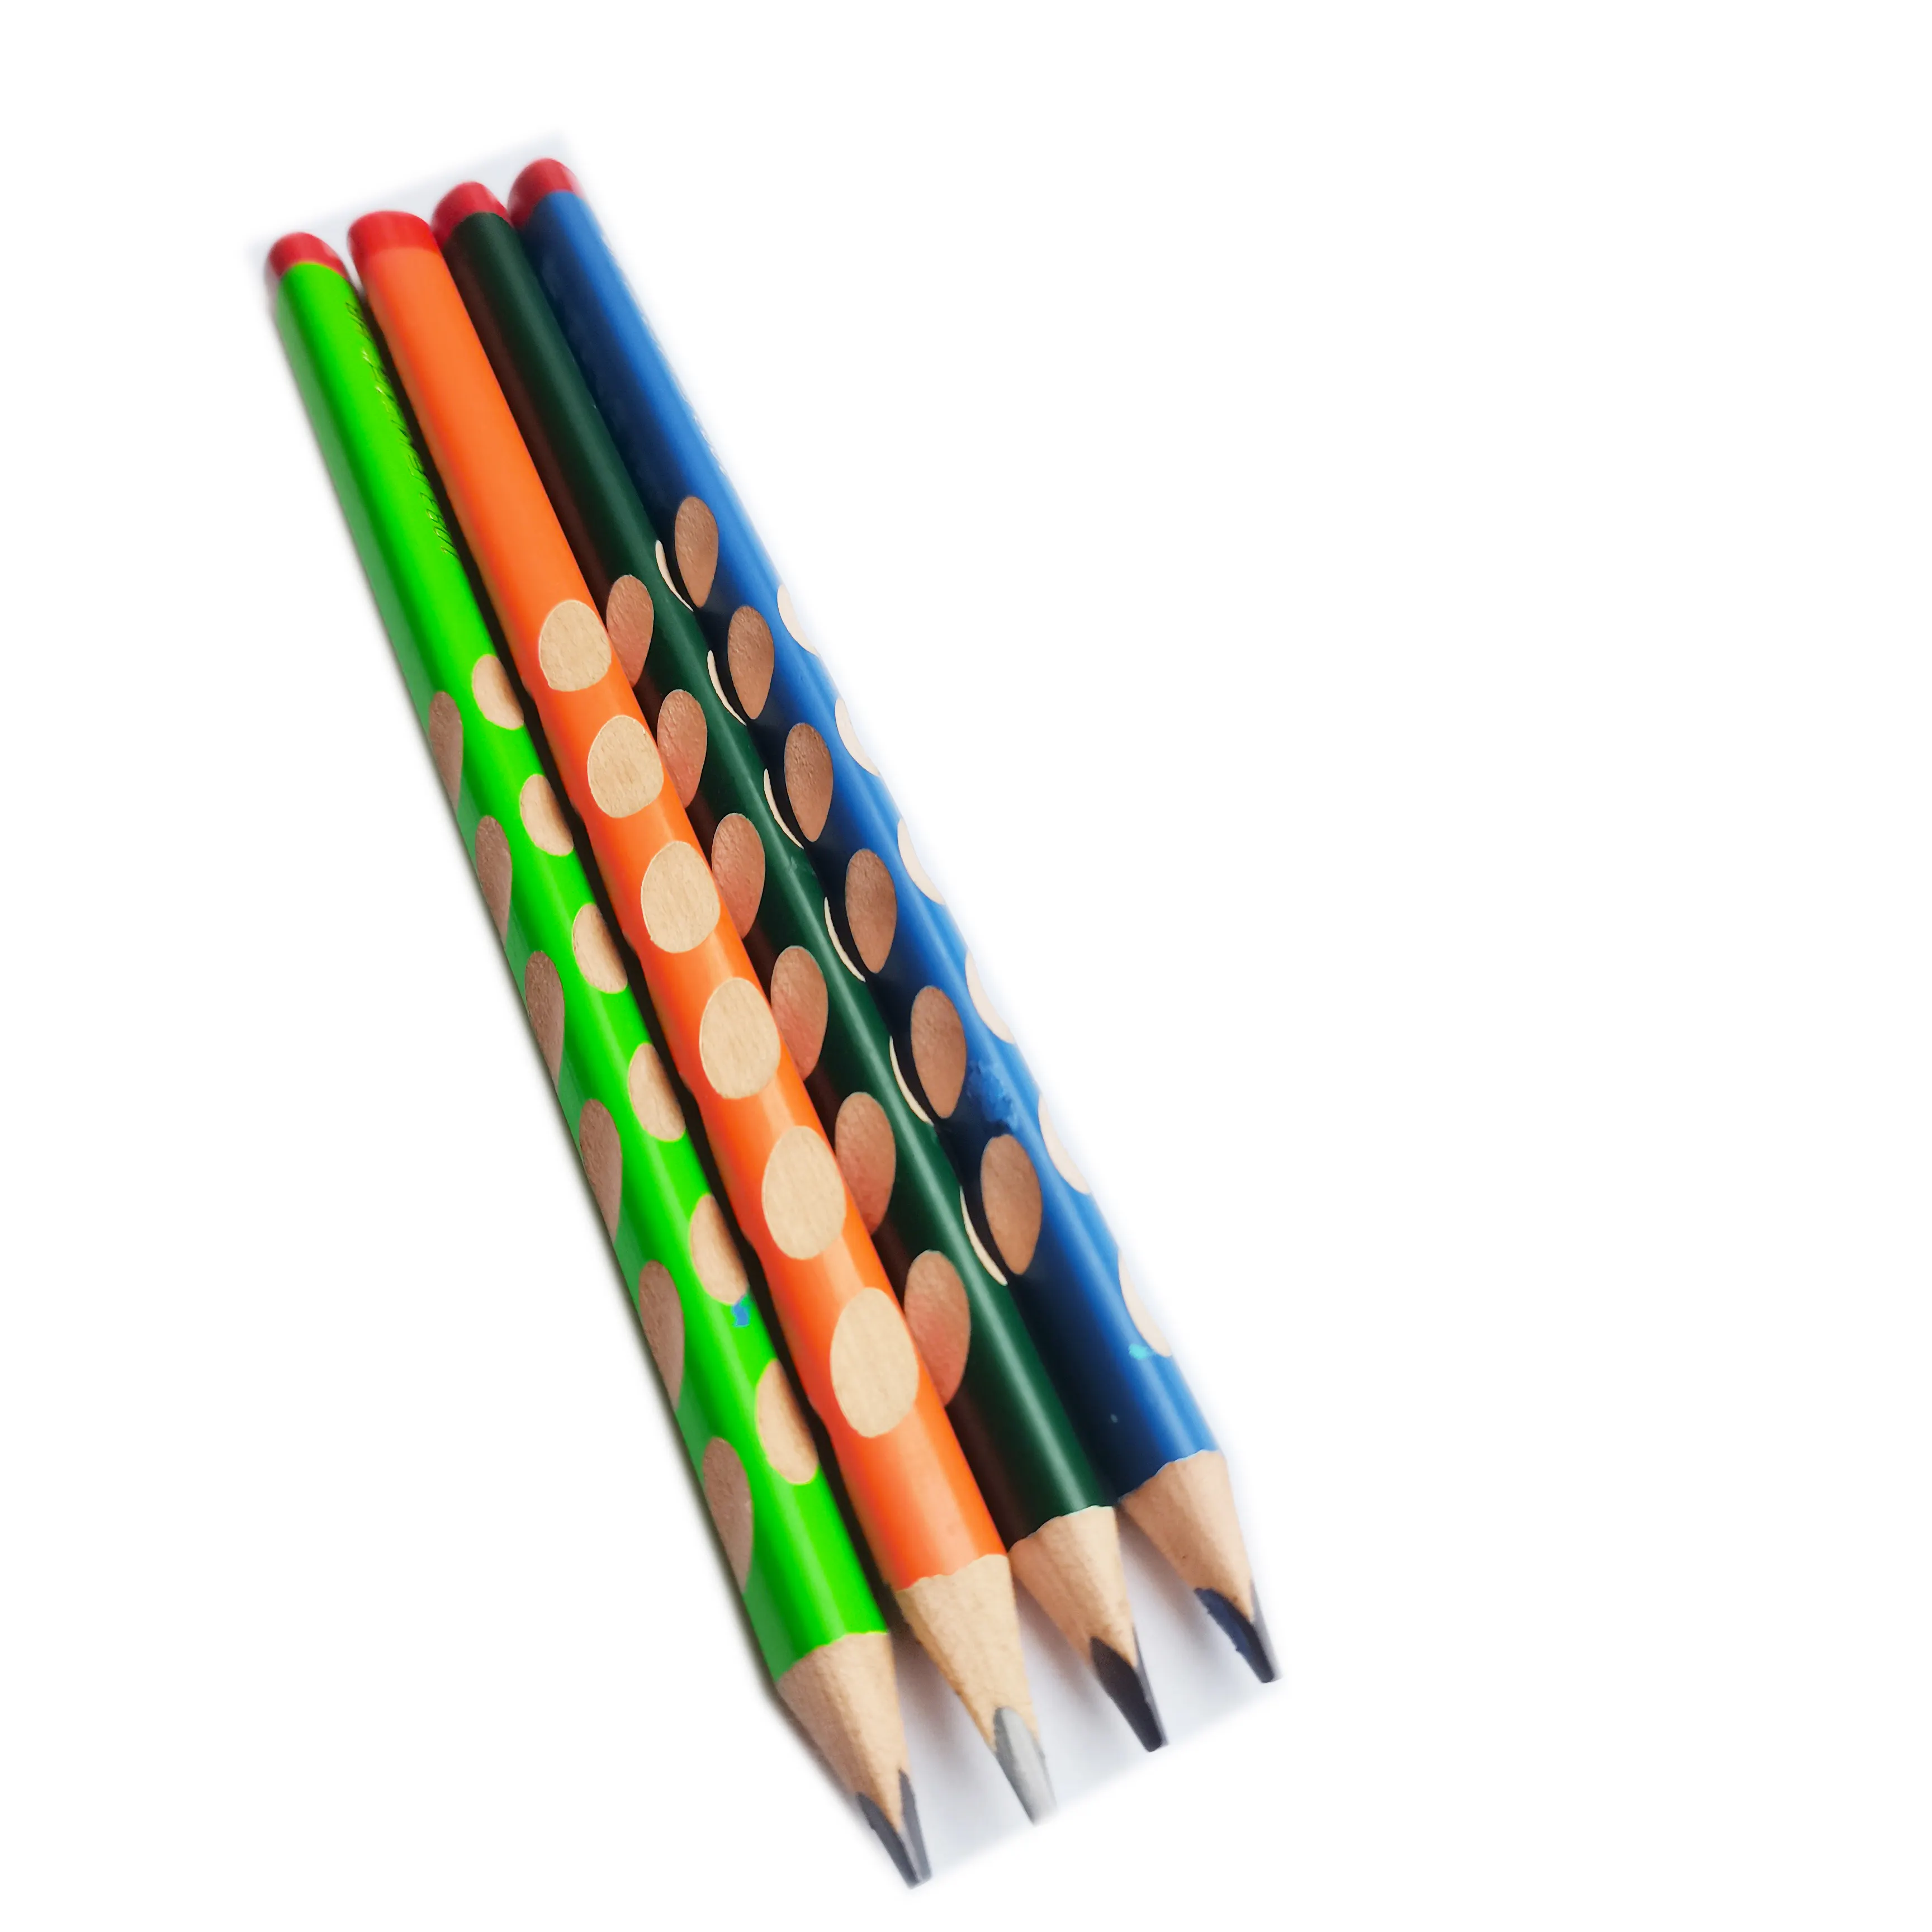 Factory Price 7Inch Triangle Jumbo Hole HB Pencils for Preschoolers Kids Easy Grasp